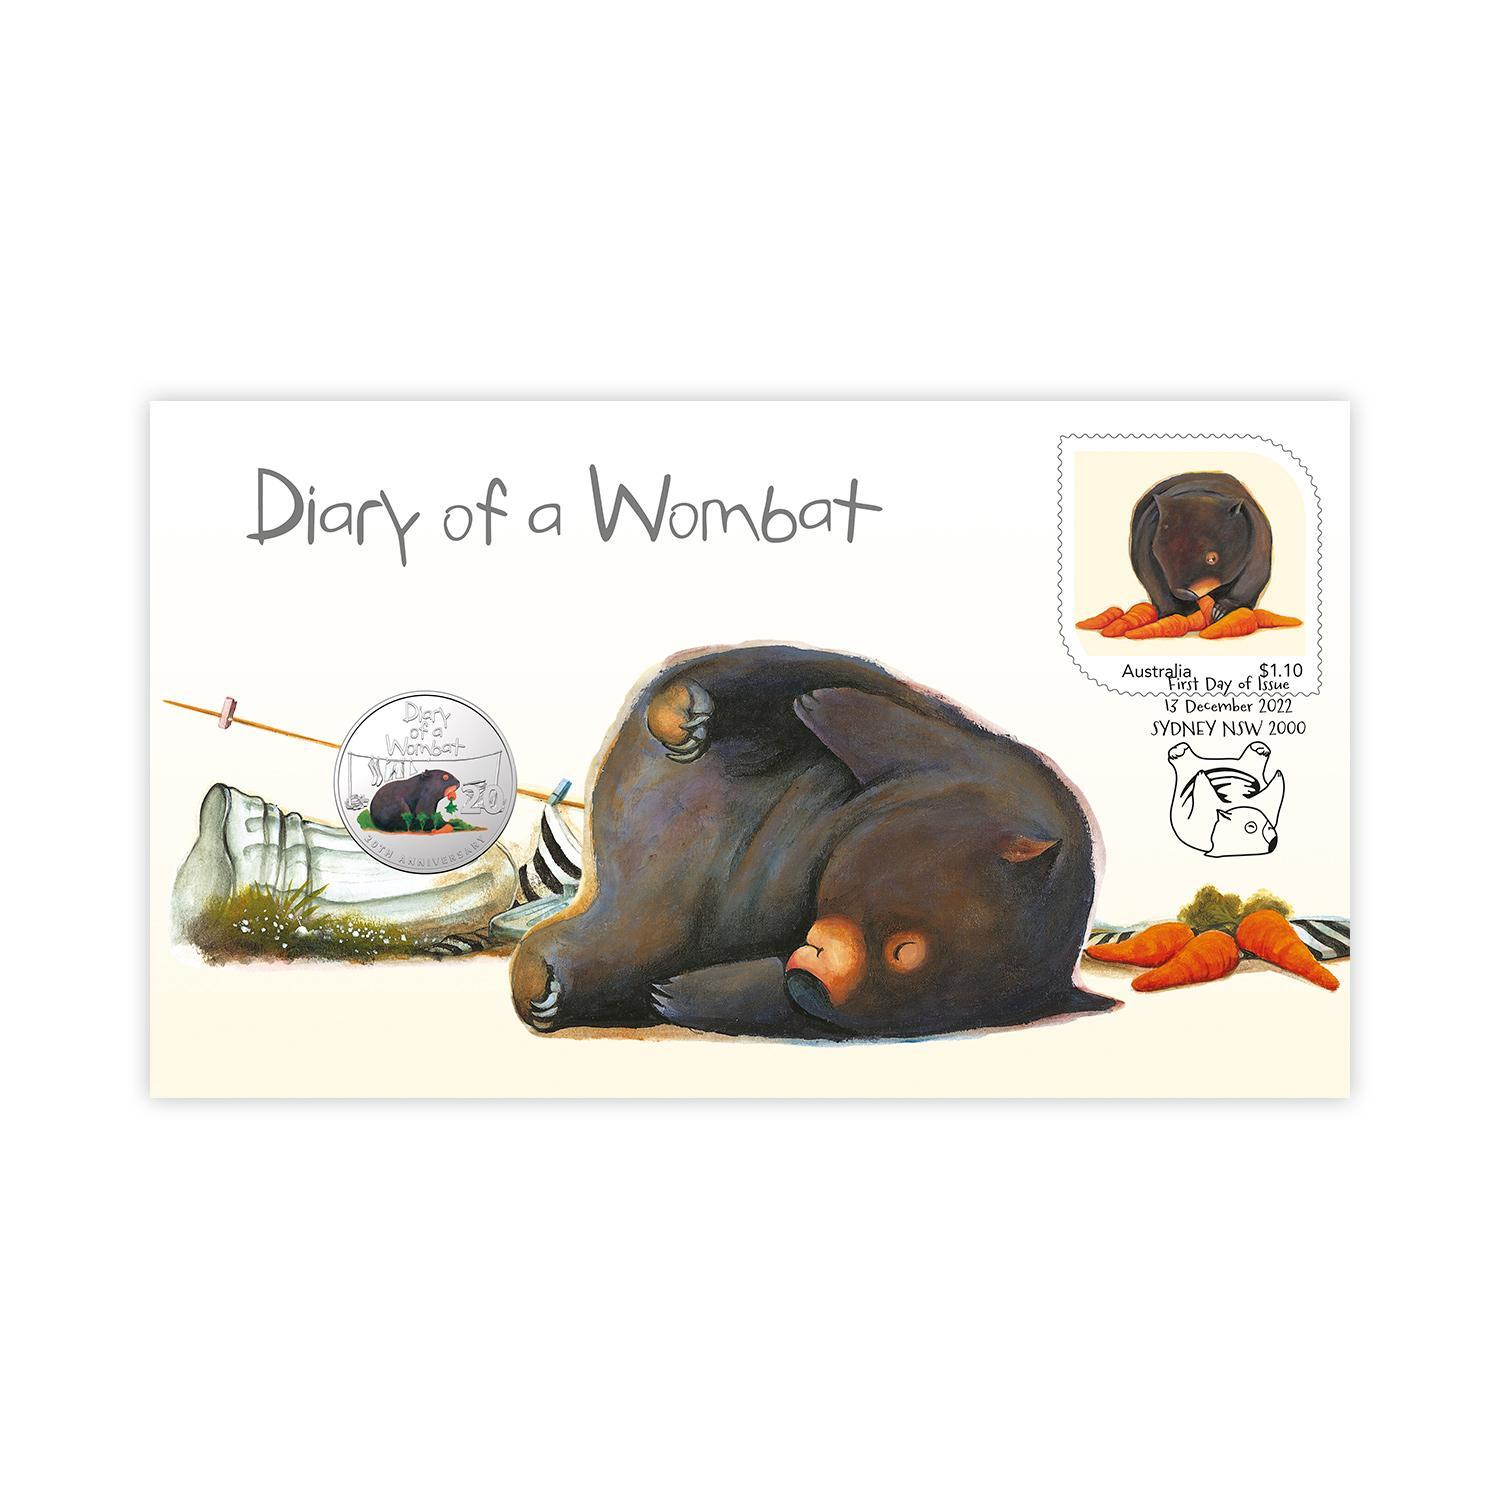 2022 20c Diary of a Wombat PNC